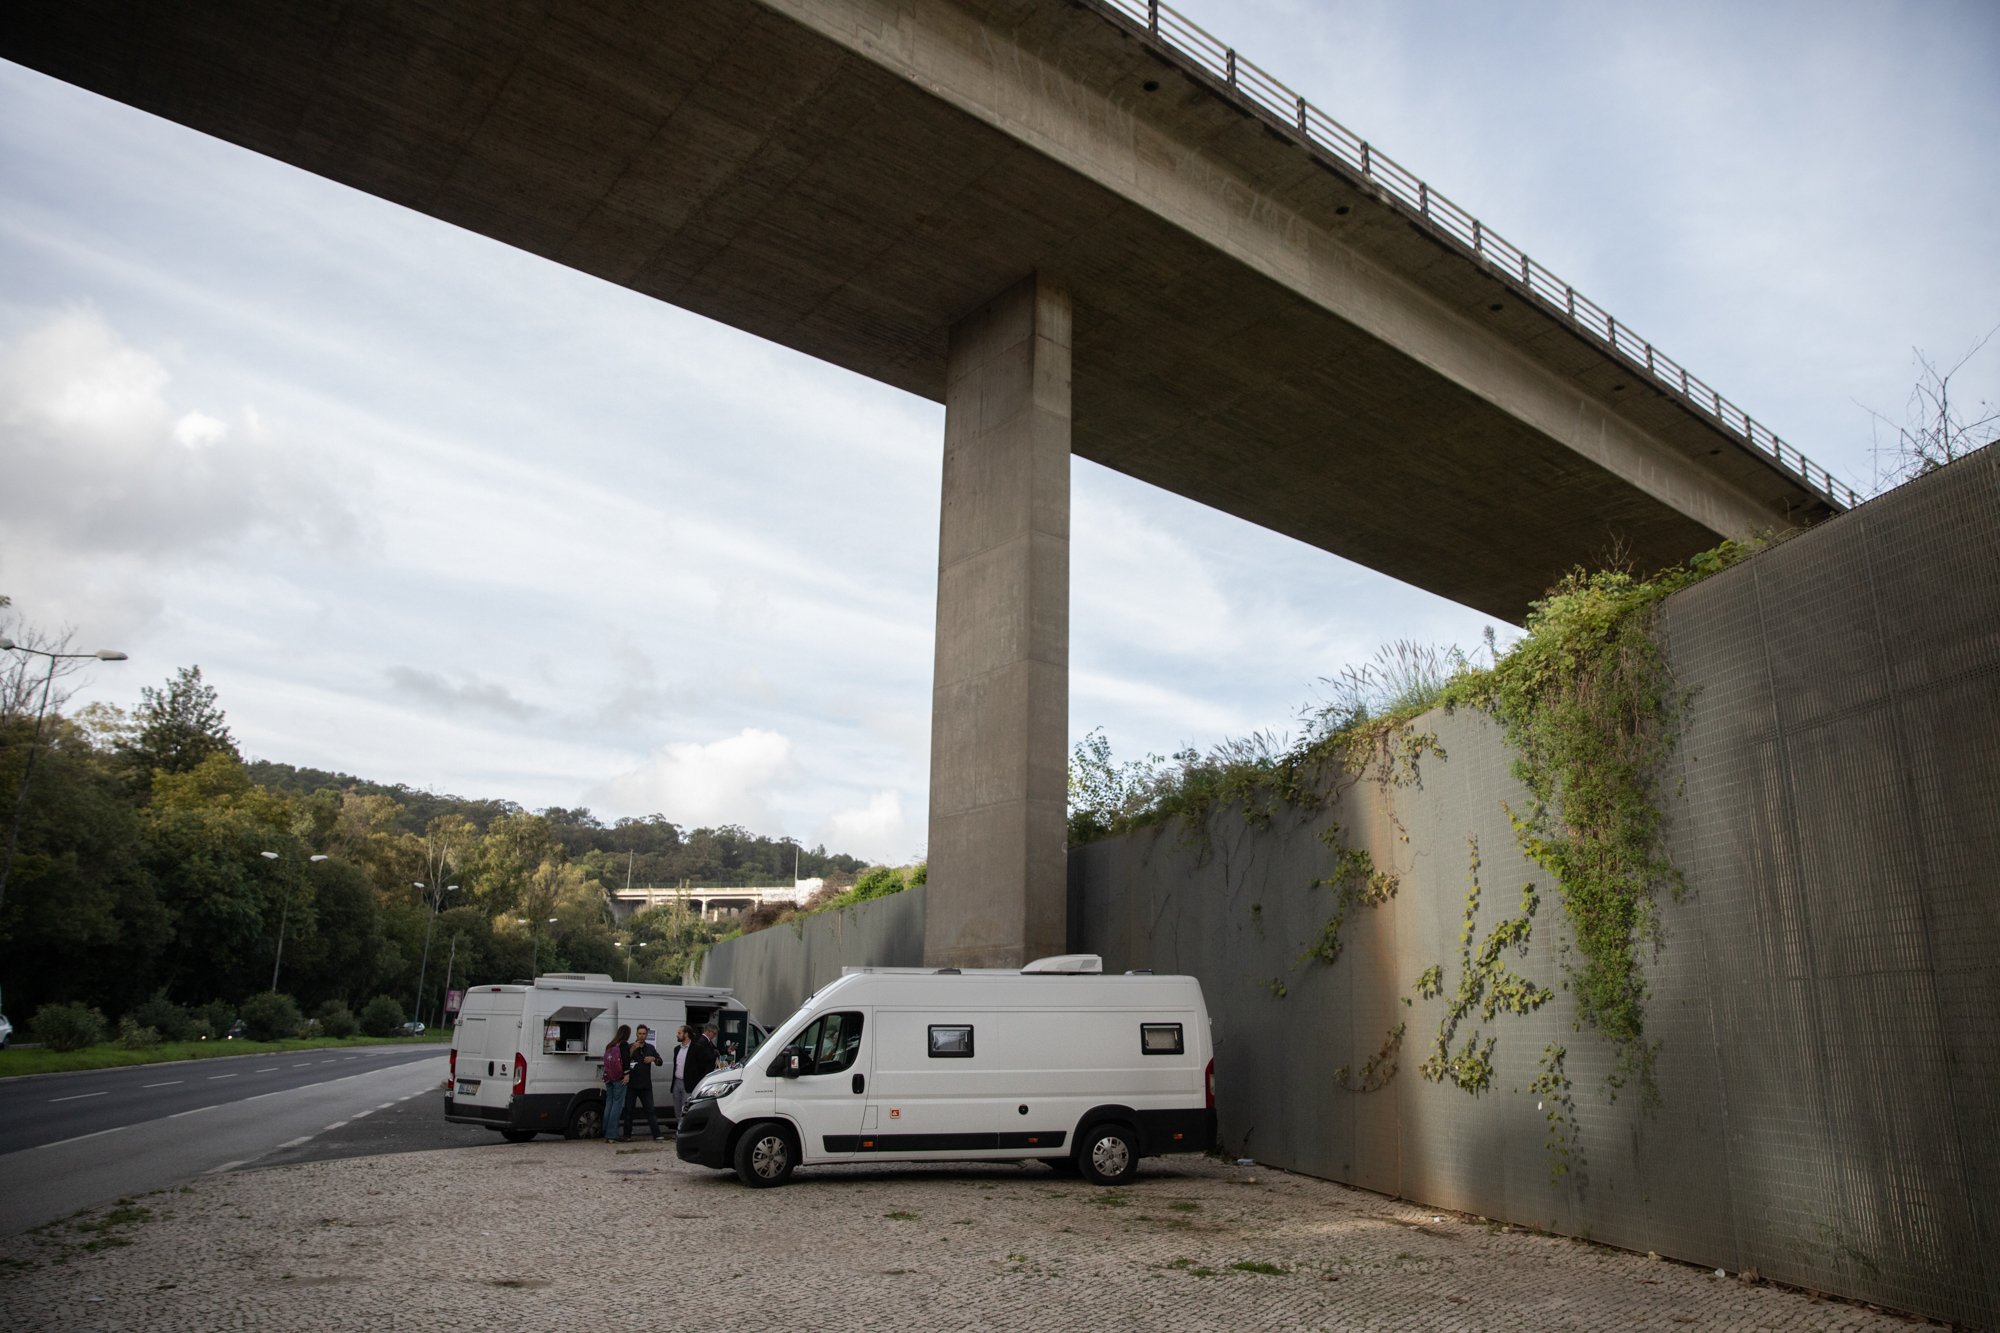  For many in Lisbon, methadone arrives by van. About 1,300 people are served daily by one nonprofit’s mobile methadone program.October, 27, 2023 